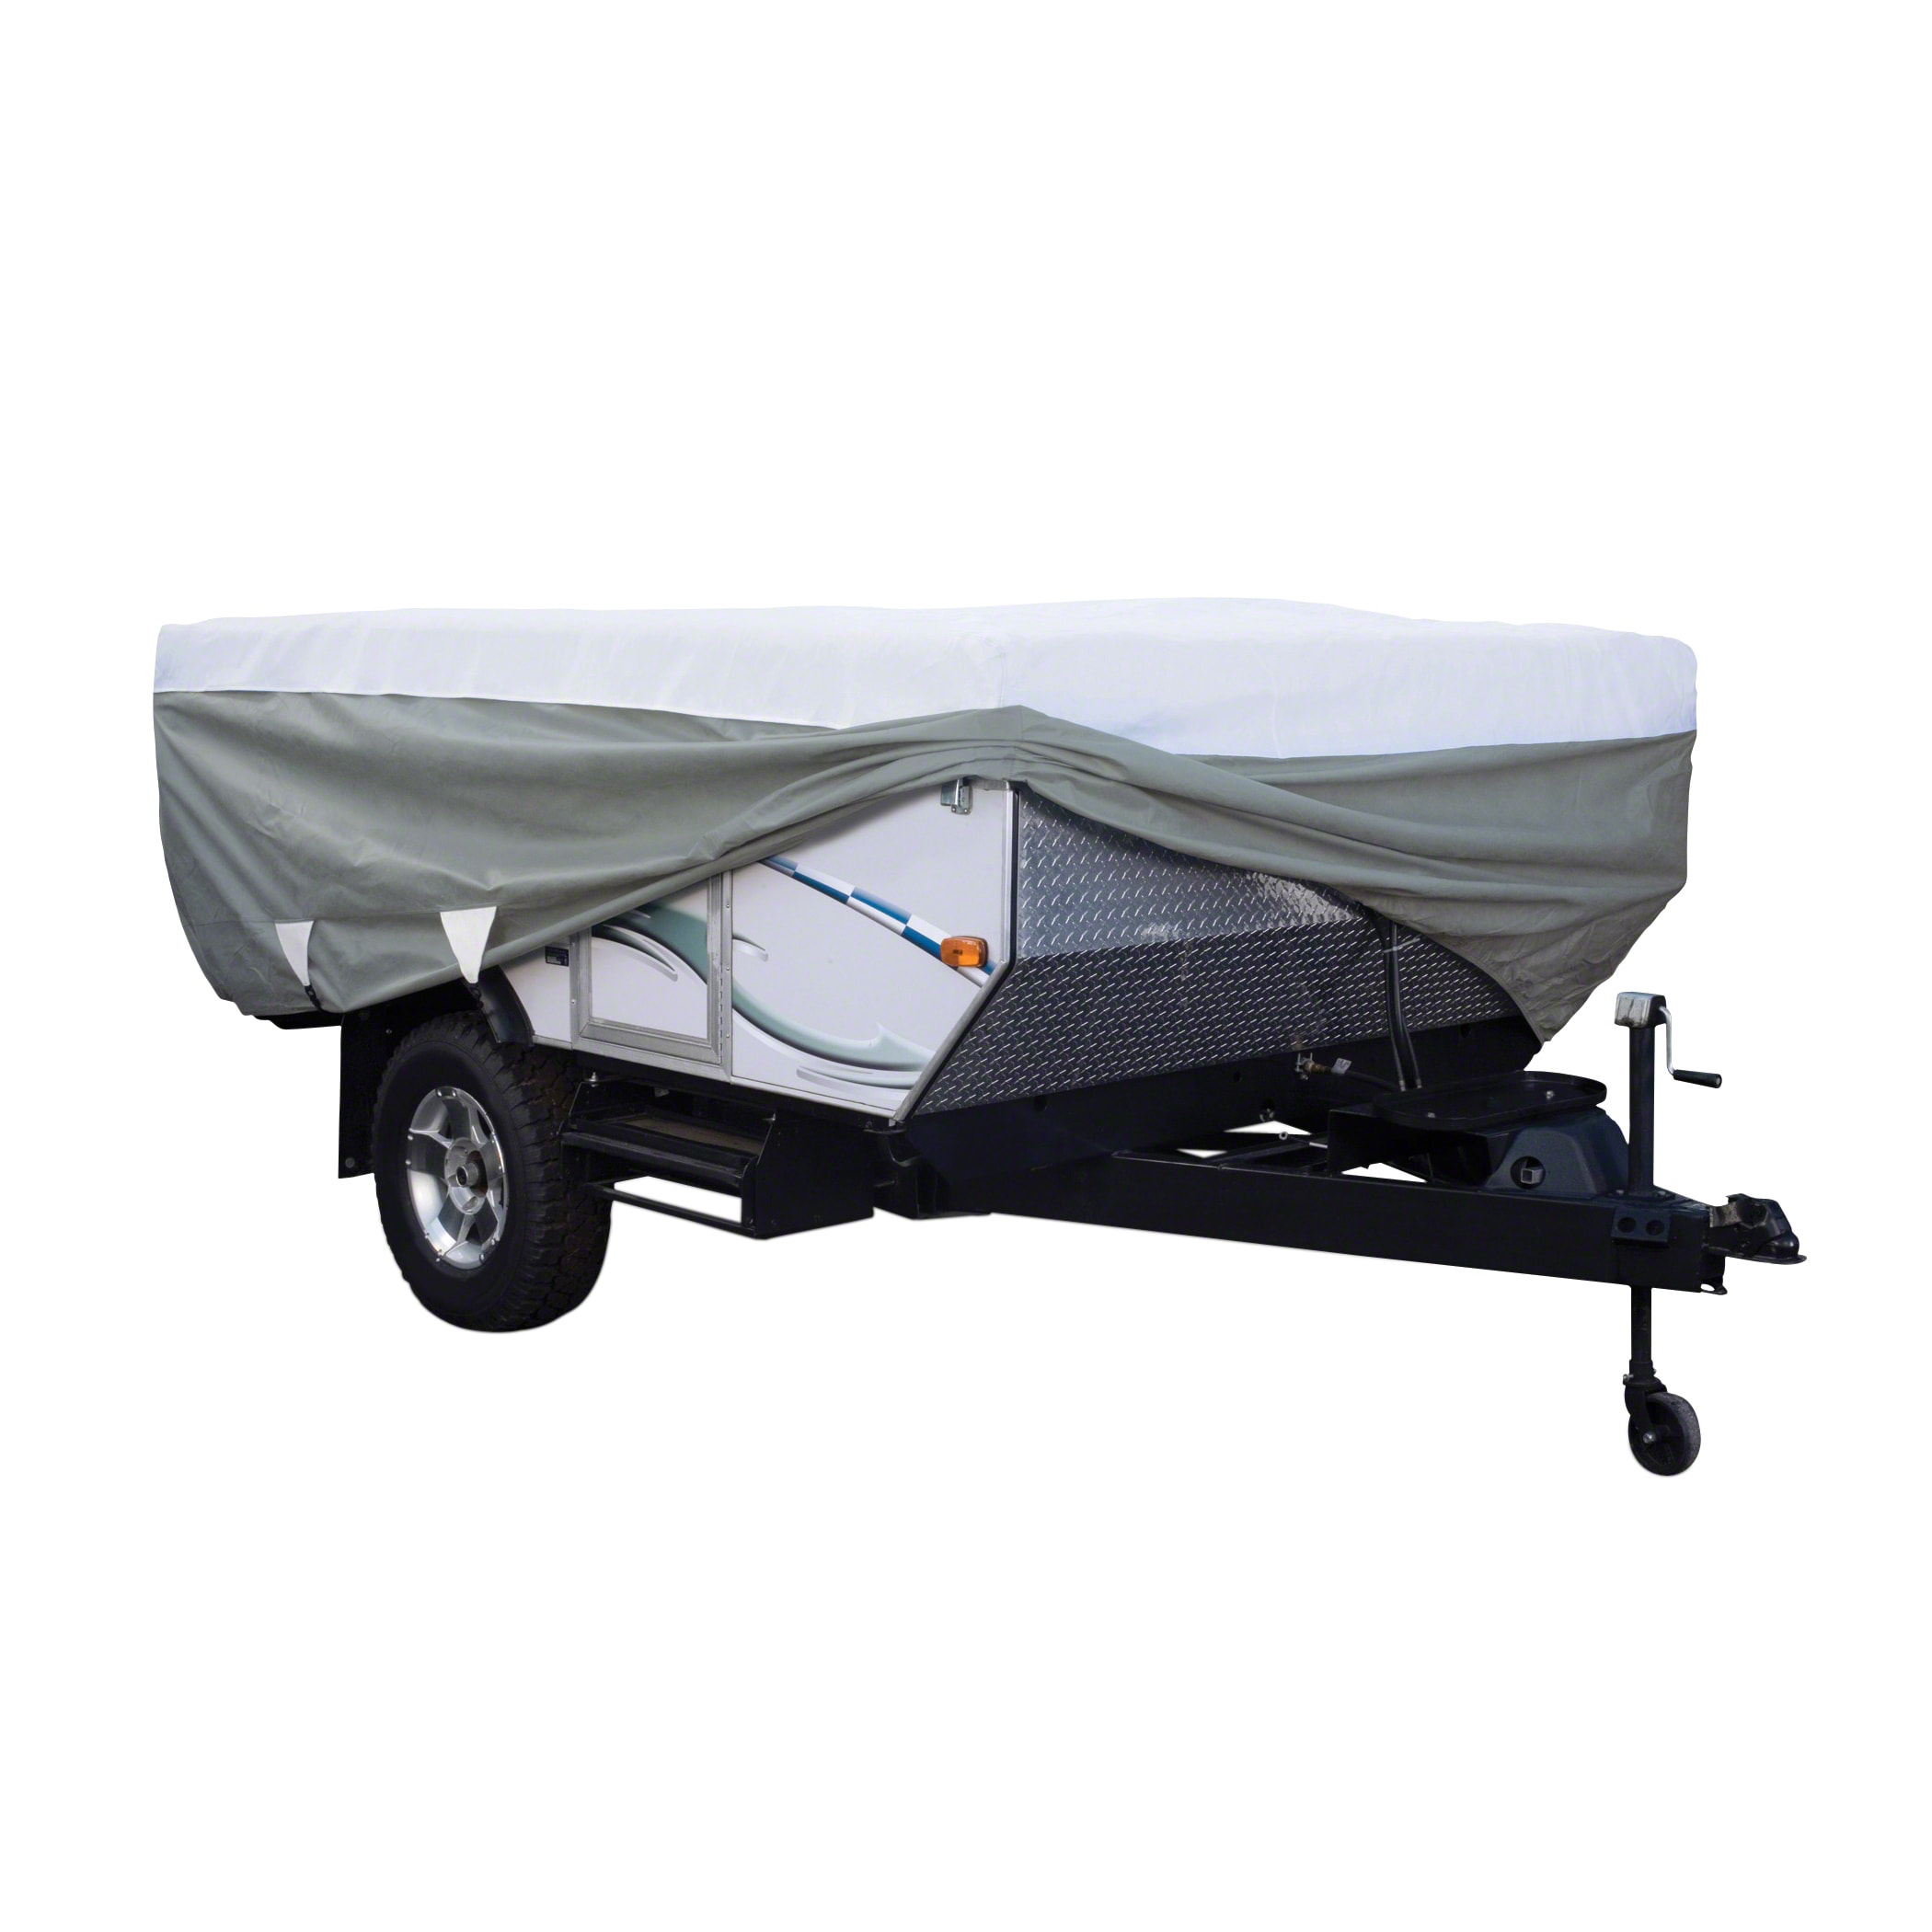 Classic Accessories Over Drive Polypro3 Deluxe Pop-up Camper Trailer Cover  Up To 8 Ft 6 In L in the Recreational Vehicle Accessories department at